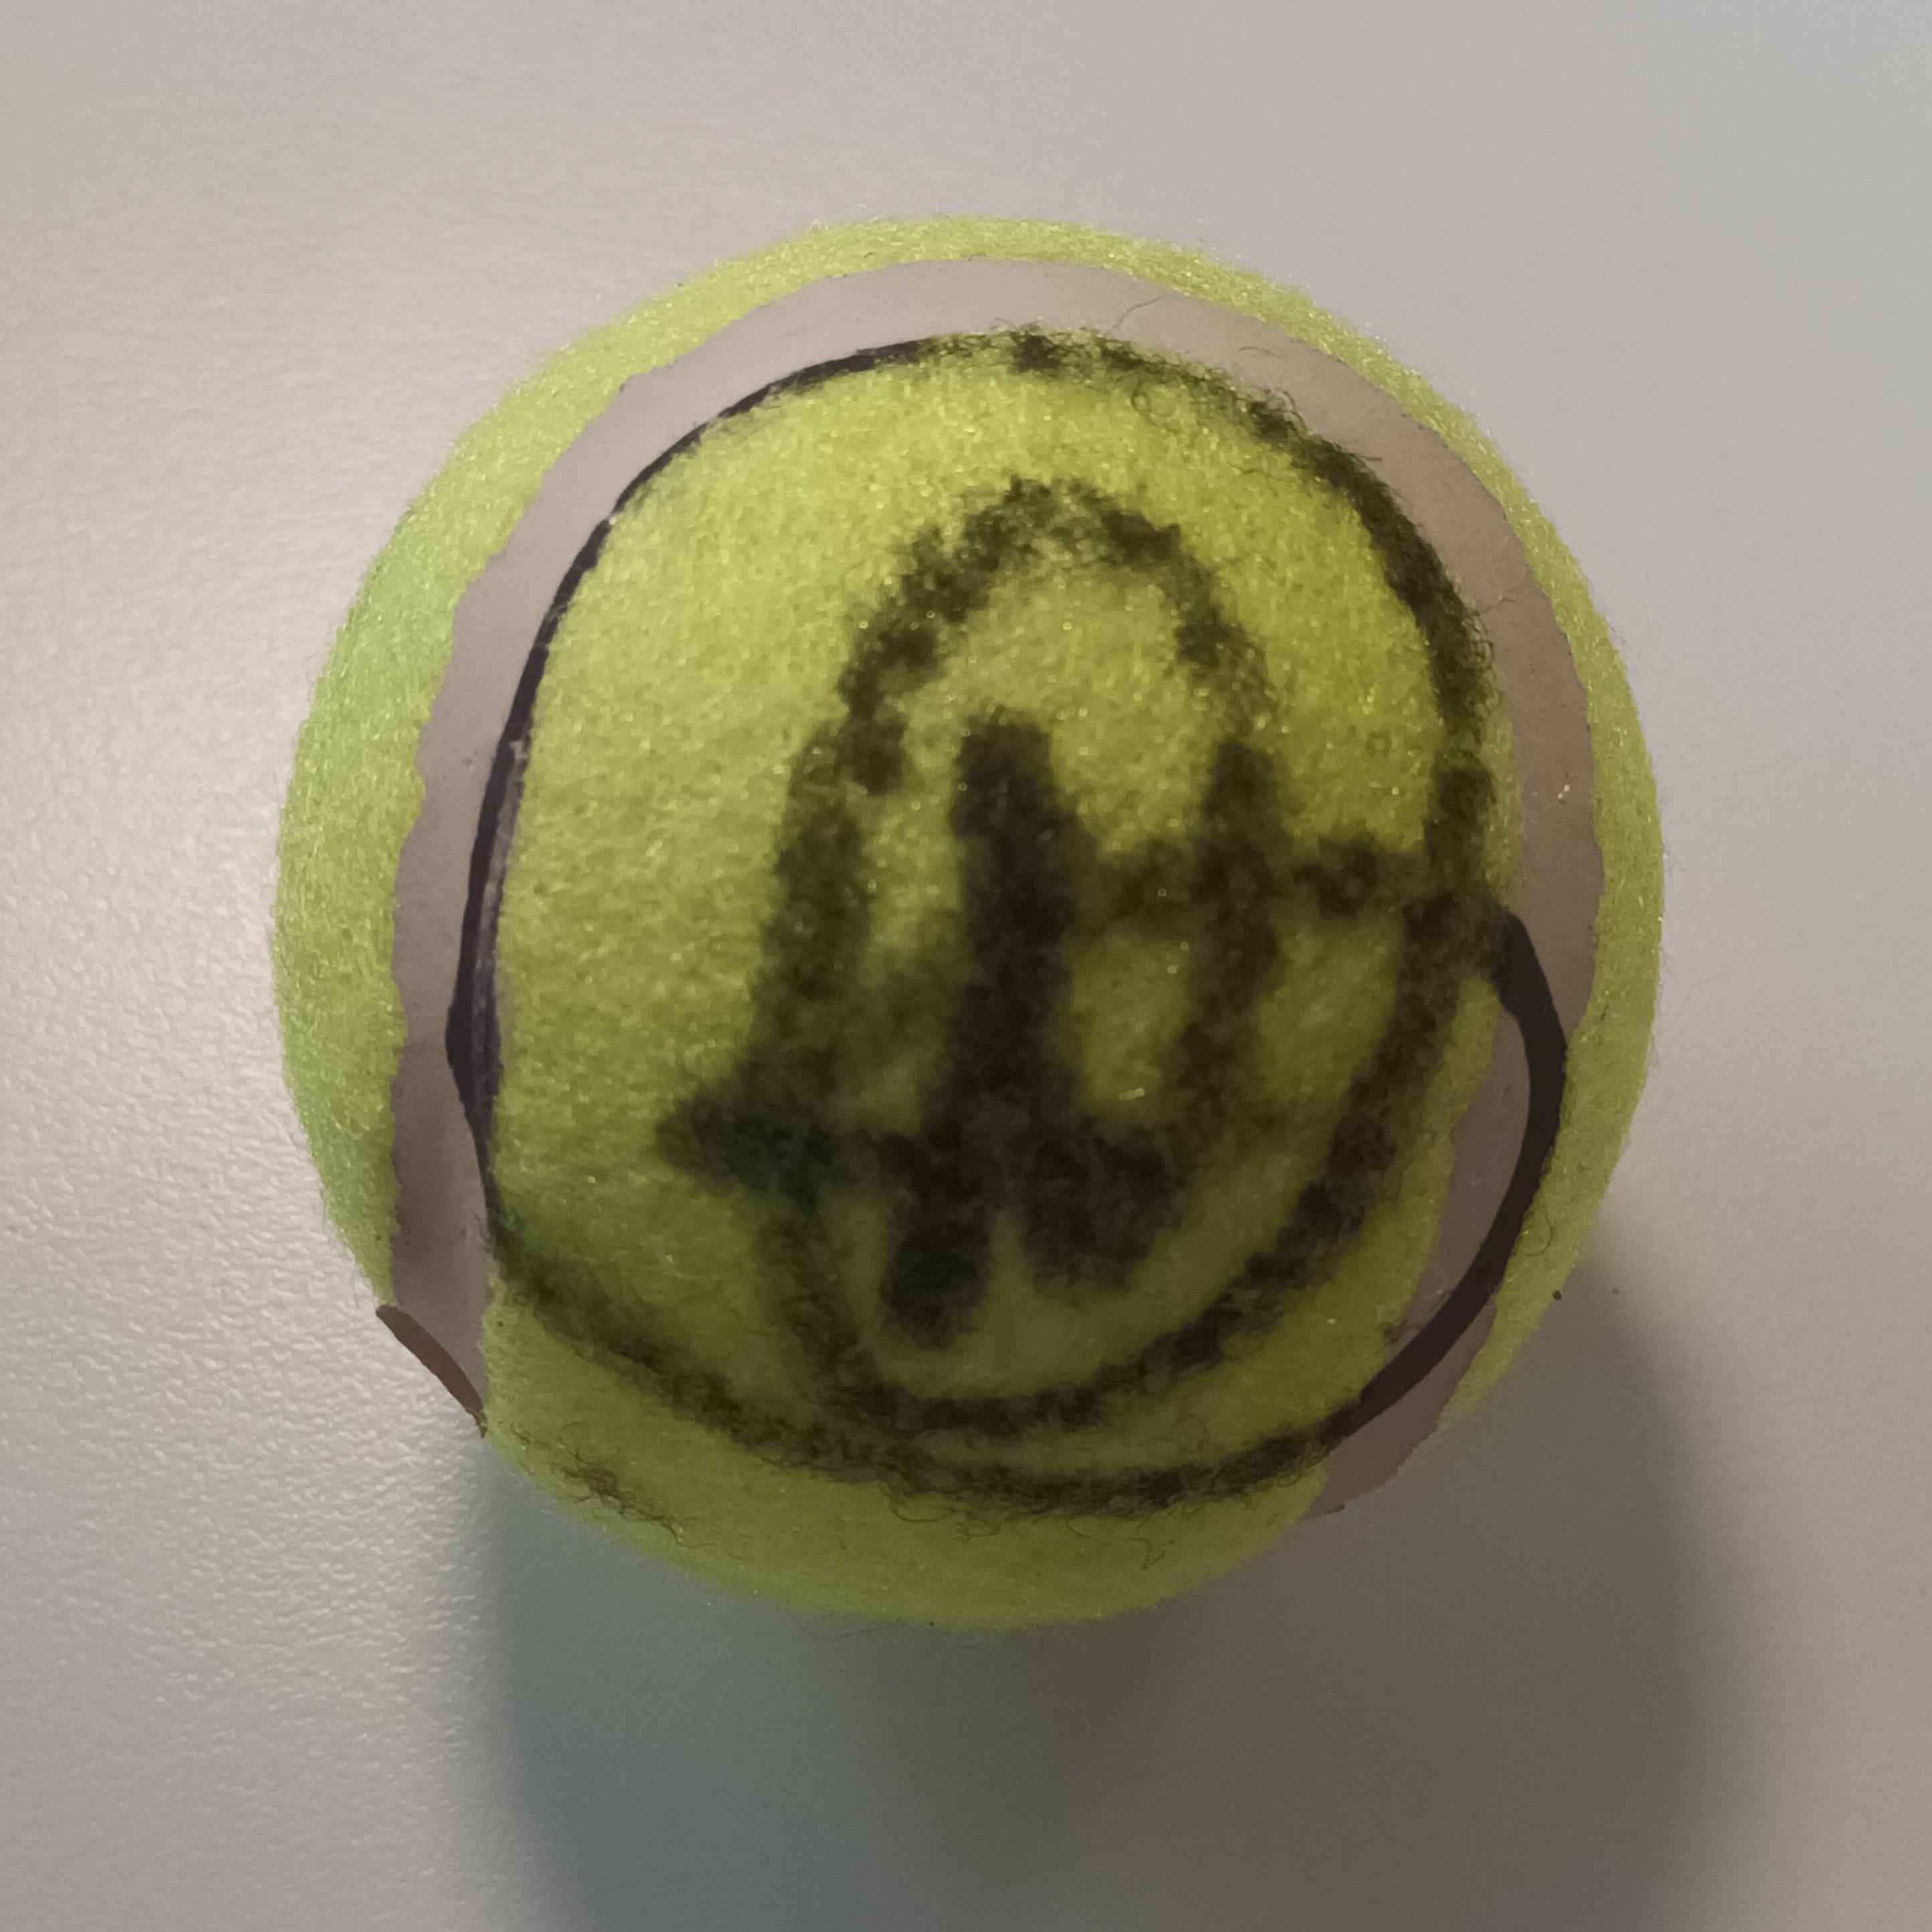 Contemporary Federer, Nadal and Djokovic Autographed Tennis Balls